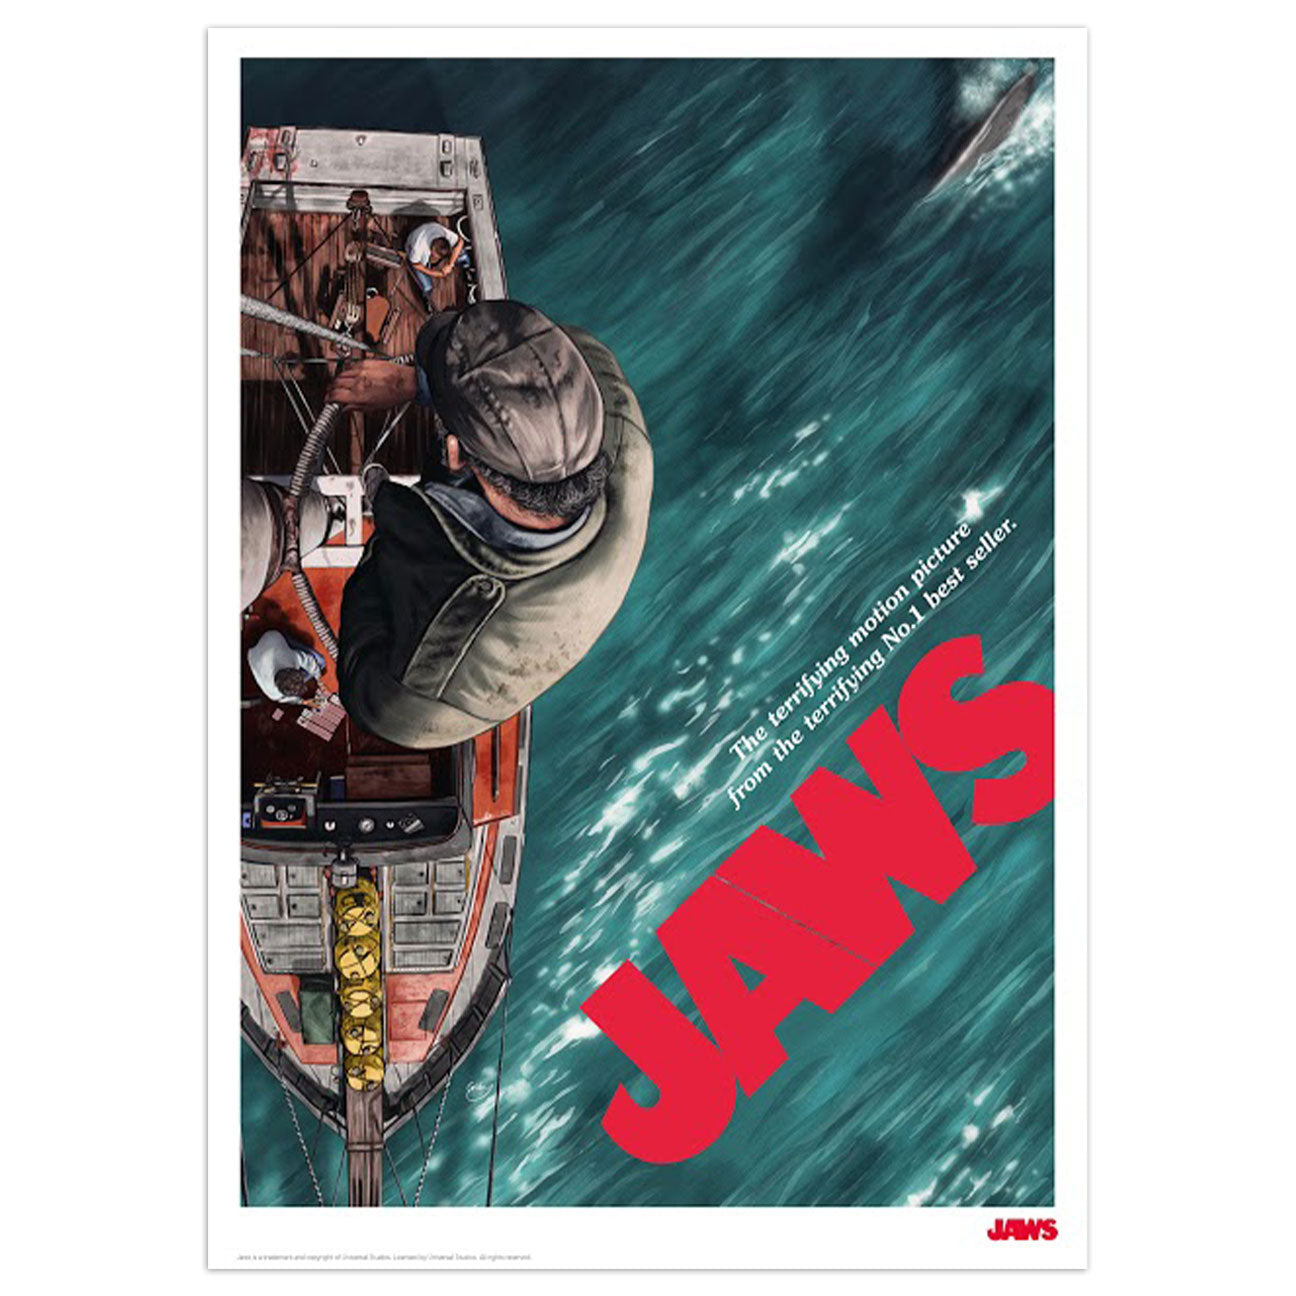 Jaws Limited Edition Art Print